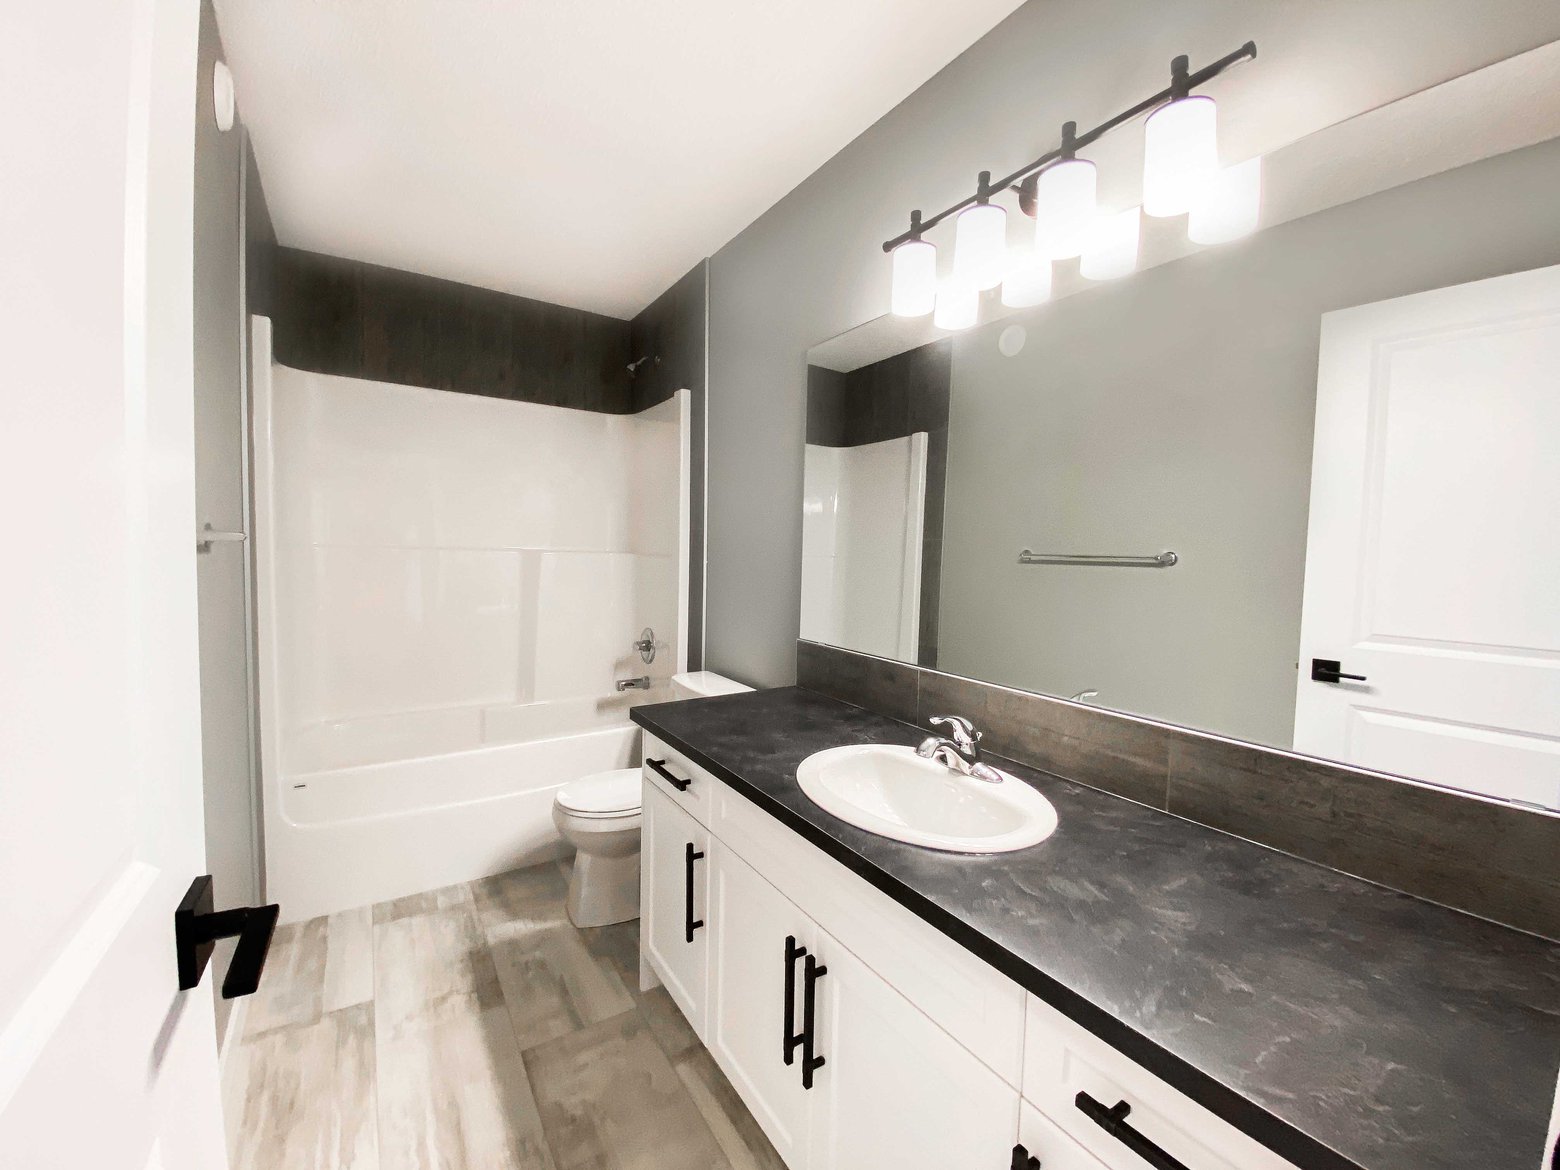 Bathroom white cabinets nelson homes modular homes ready to move homes.jpg